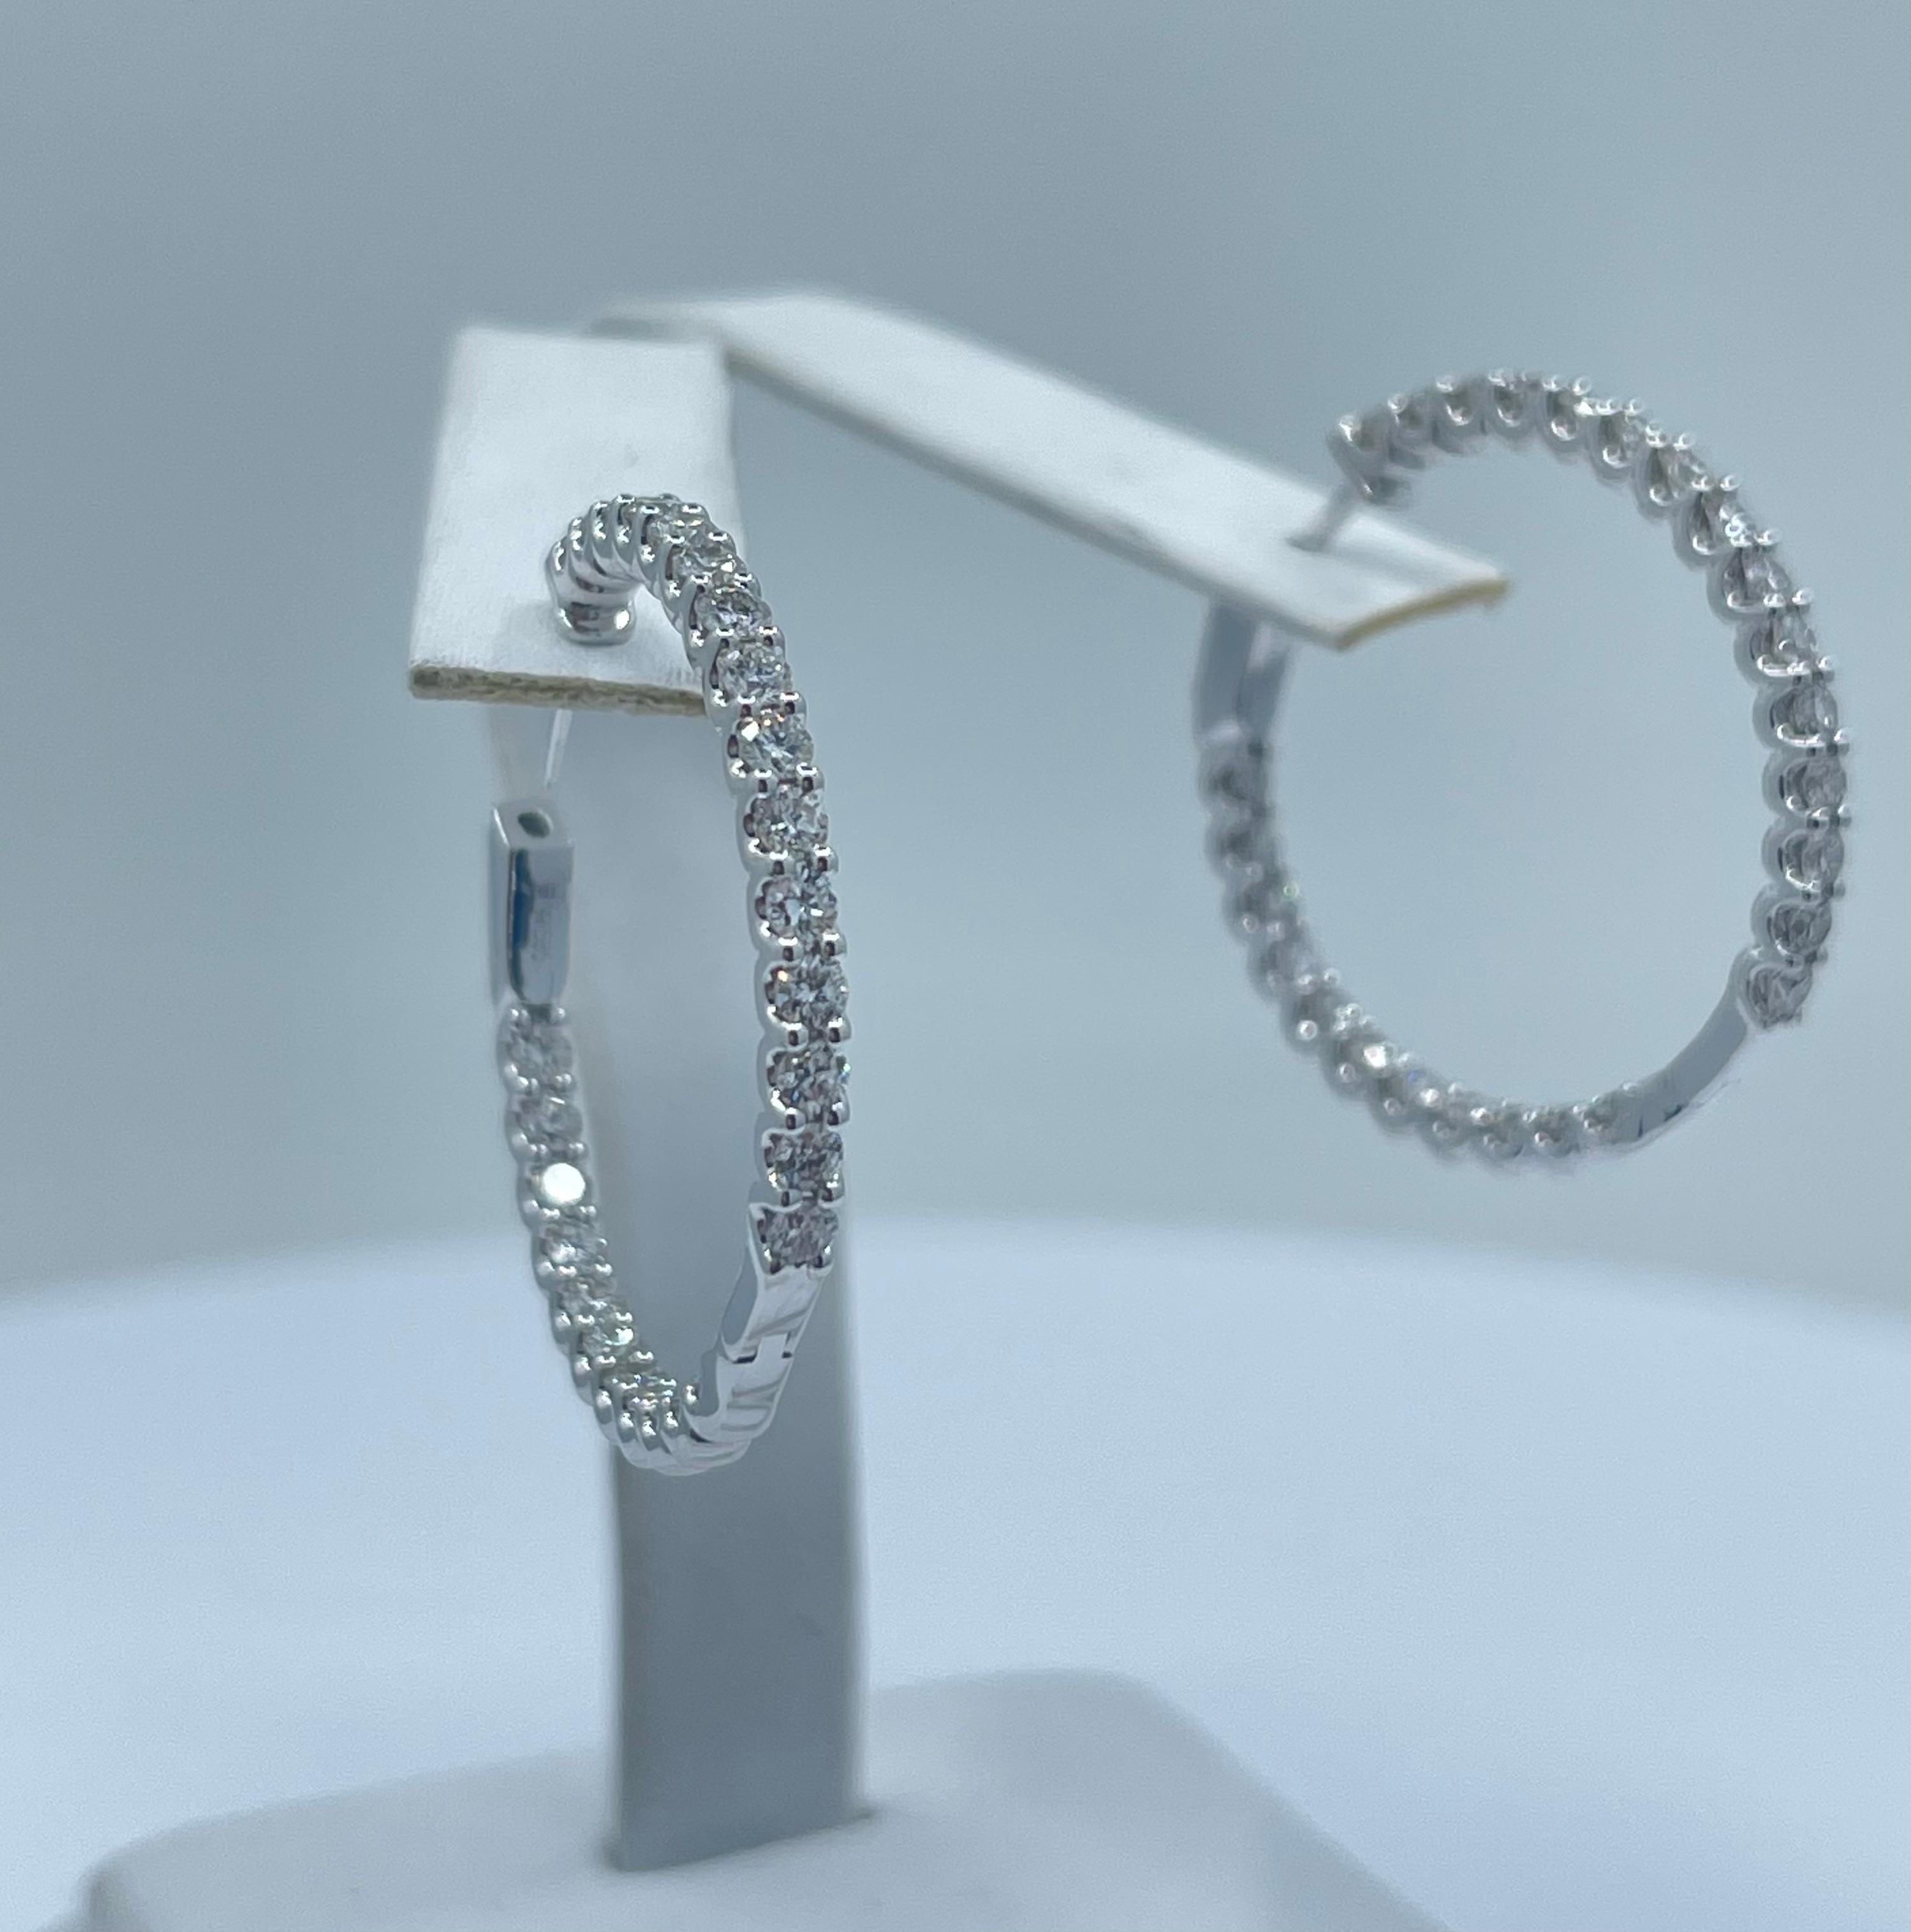 The epitome of understated elegance, these earrings feature 26 sparking round brilliant white diamonds in each earring and are “U” and prong set in 14 karat white gold, with all the diamonds facing forward.  So wearable they will become your